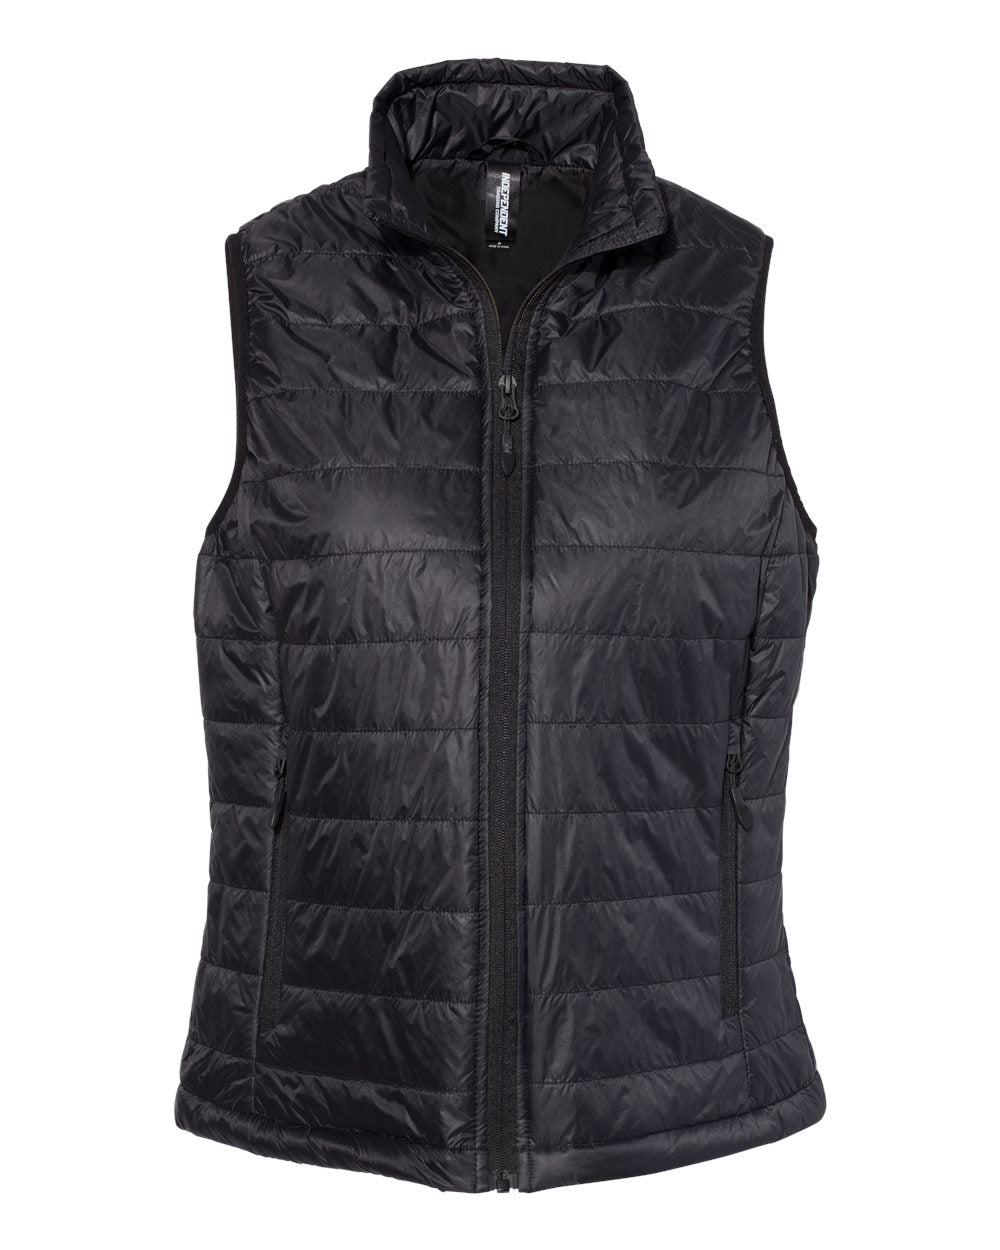 Independent Trading Co. Women's Puffer Vest EXP220PFV #color_Black